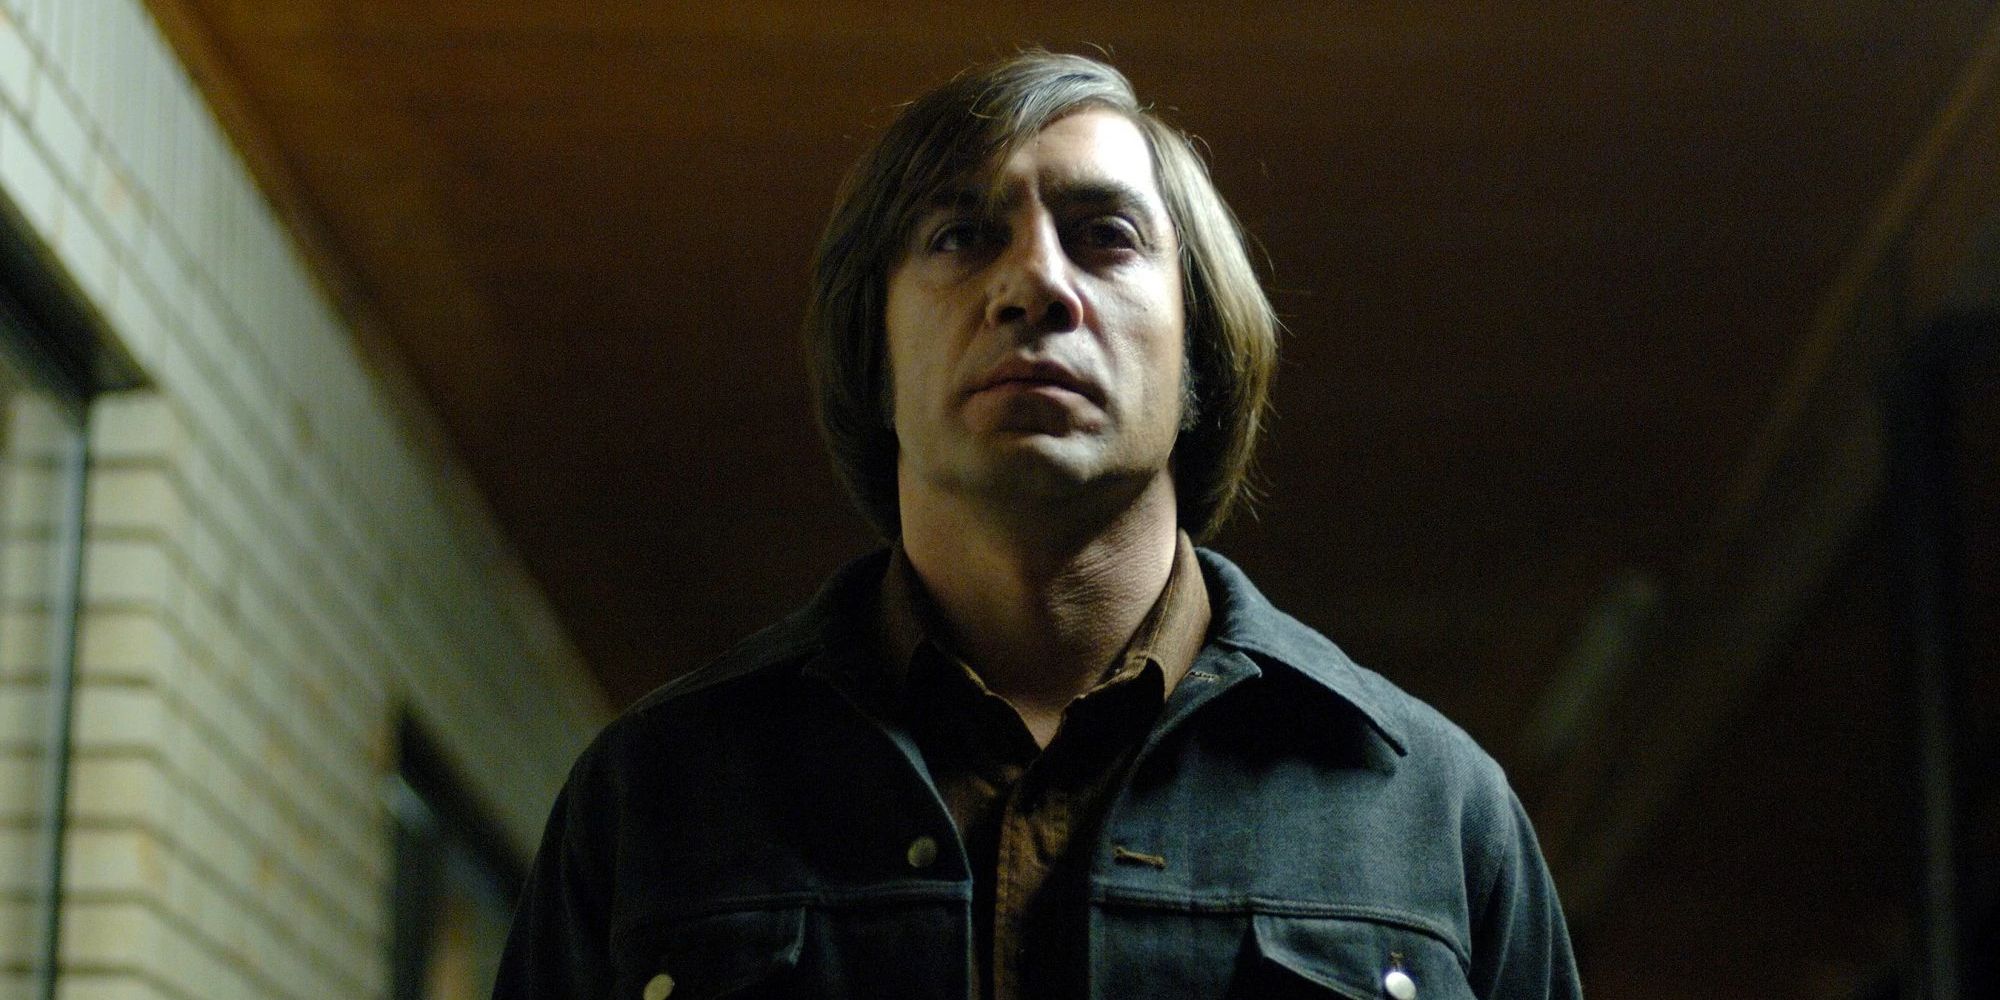 Javier Bardem as Anton Chigurh in No Country For Old Men